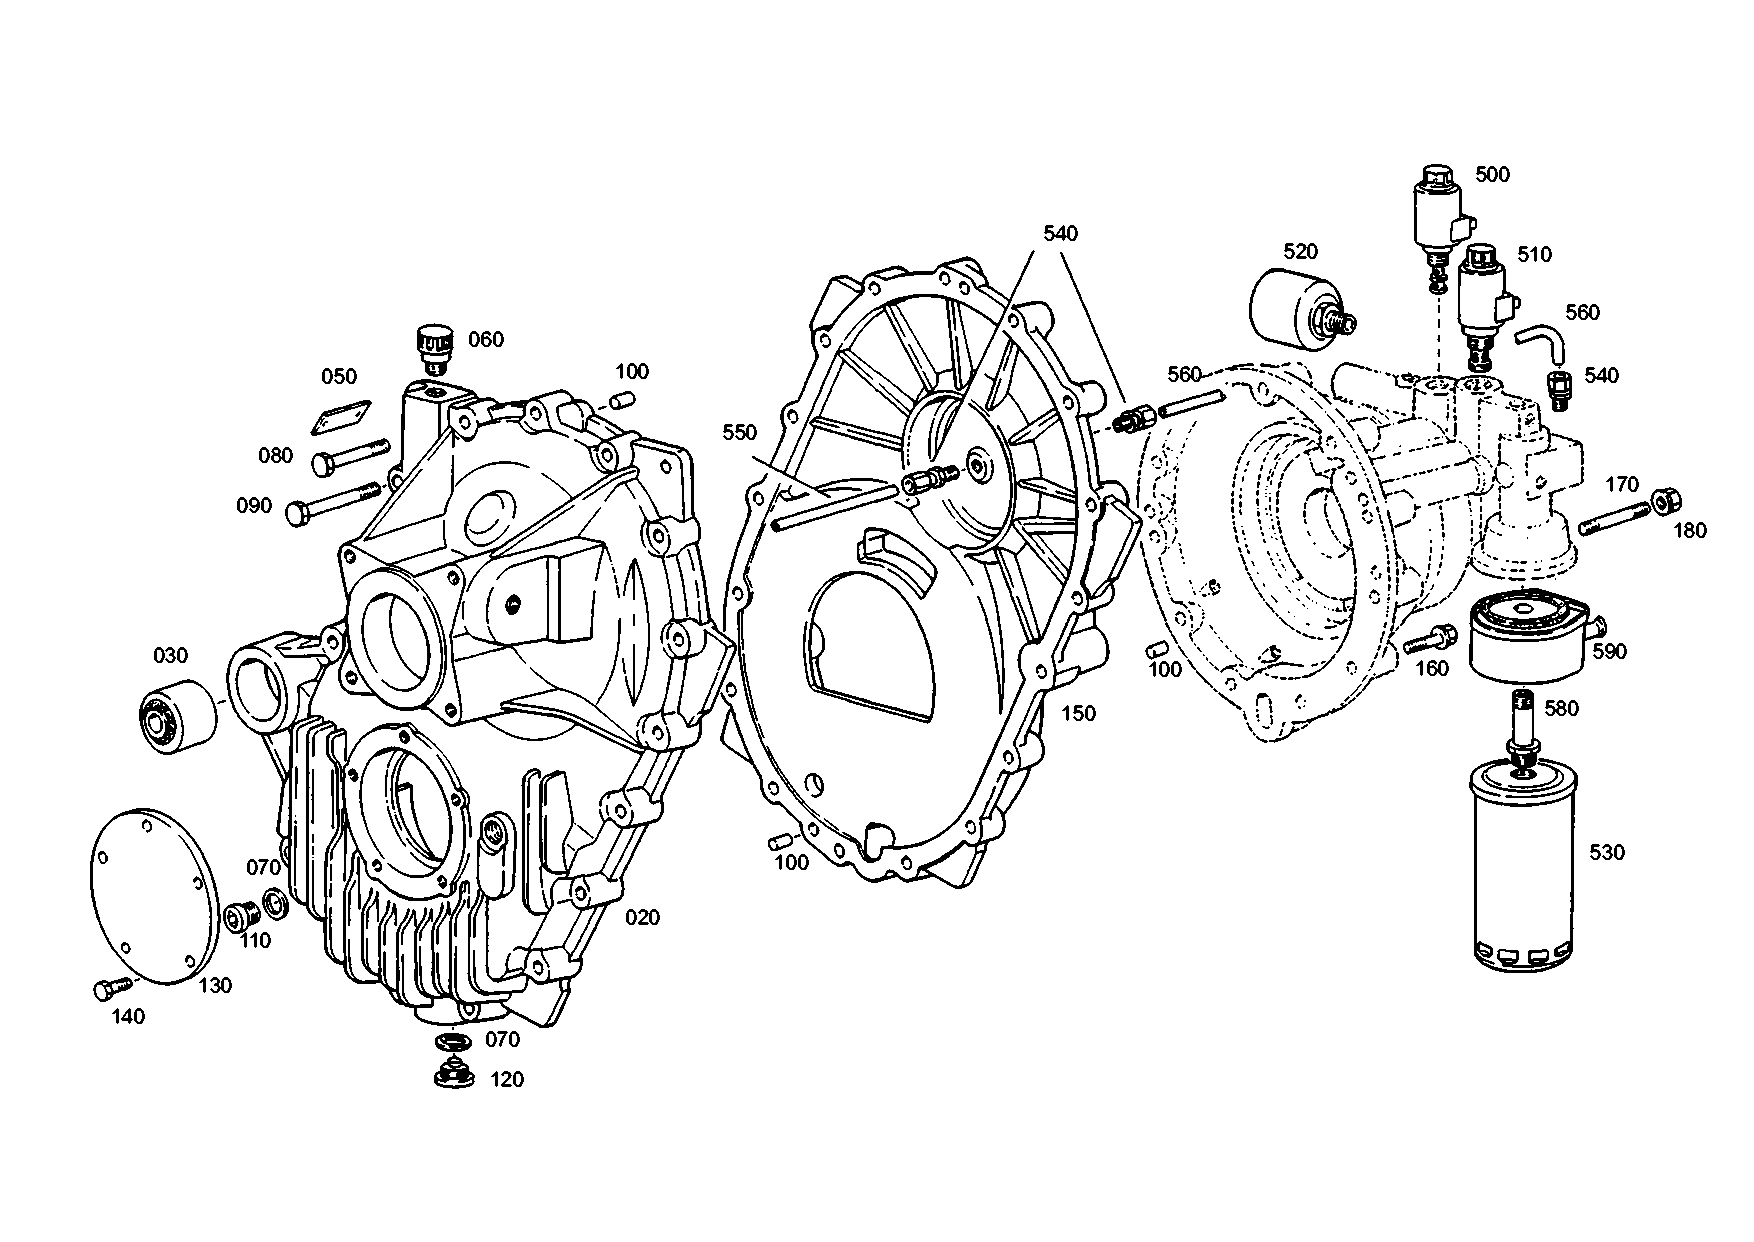 drawing for CLAAS CSE 5986370 - AUSSENLAM (figure 1)